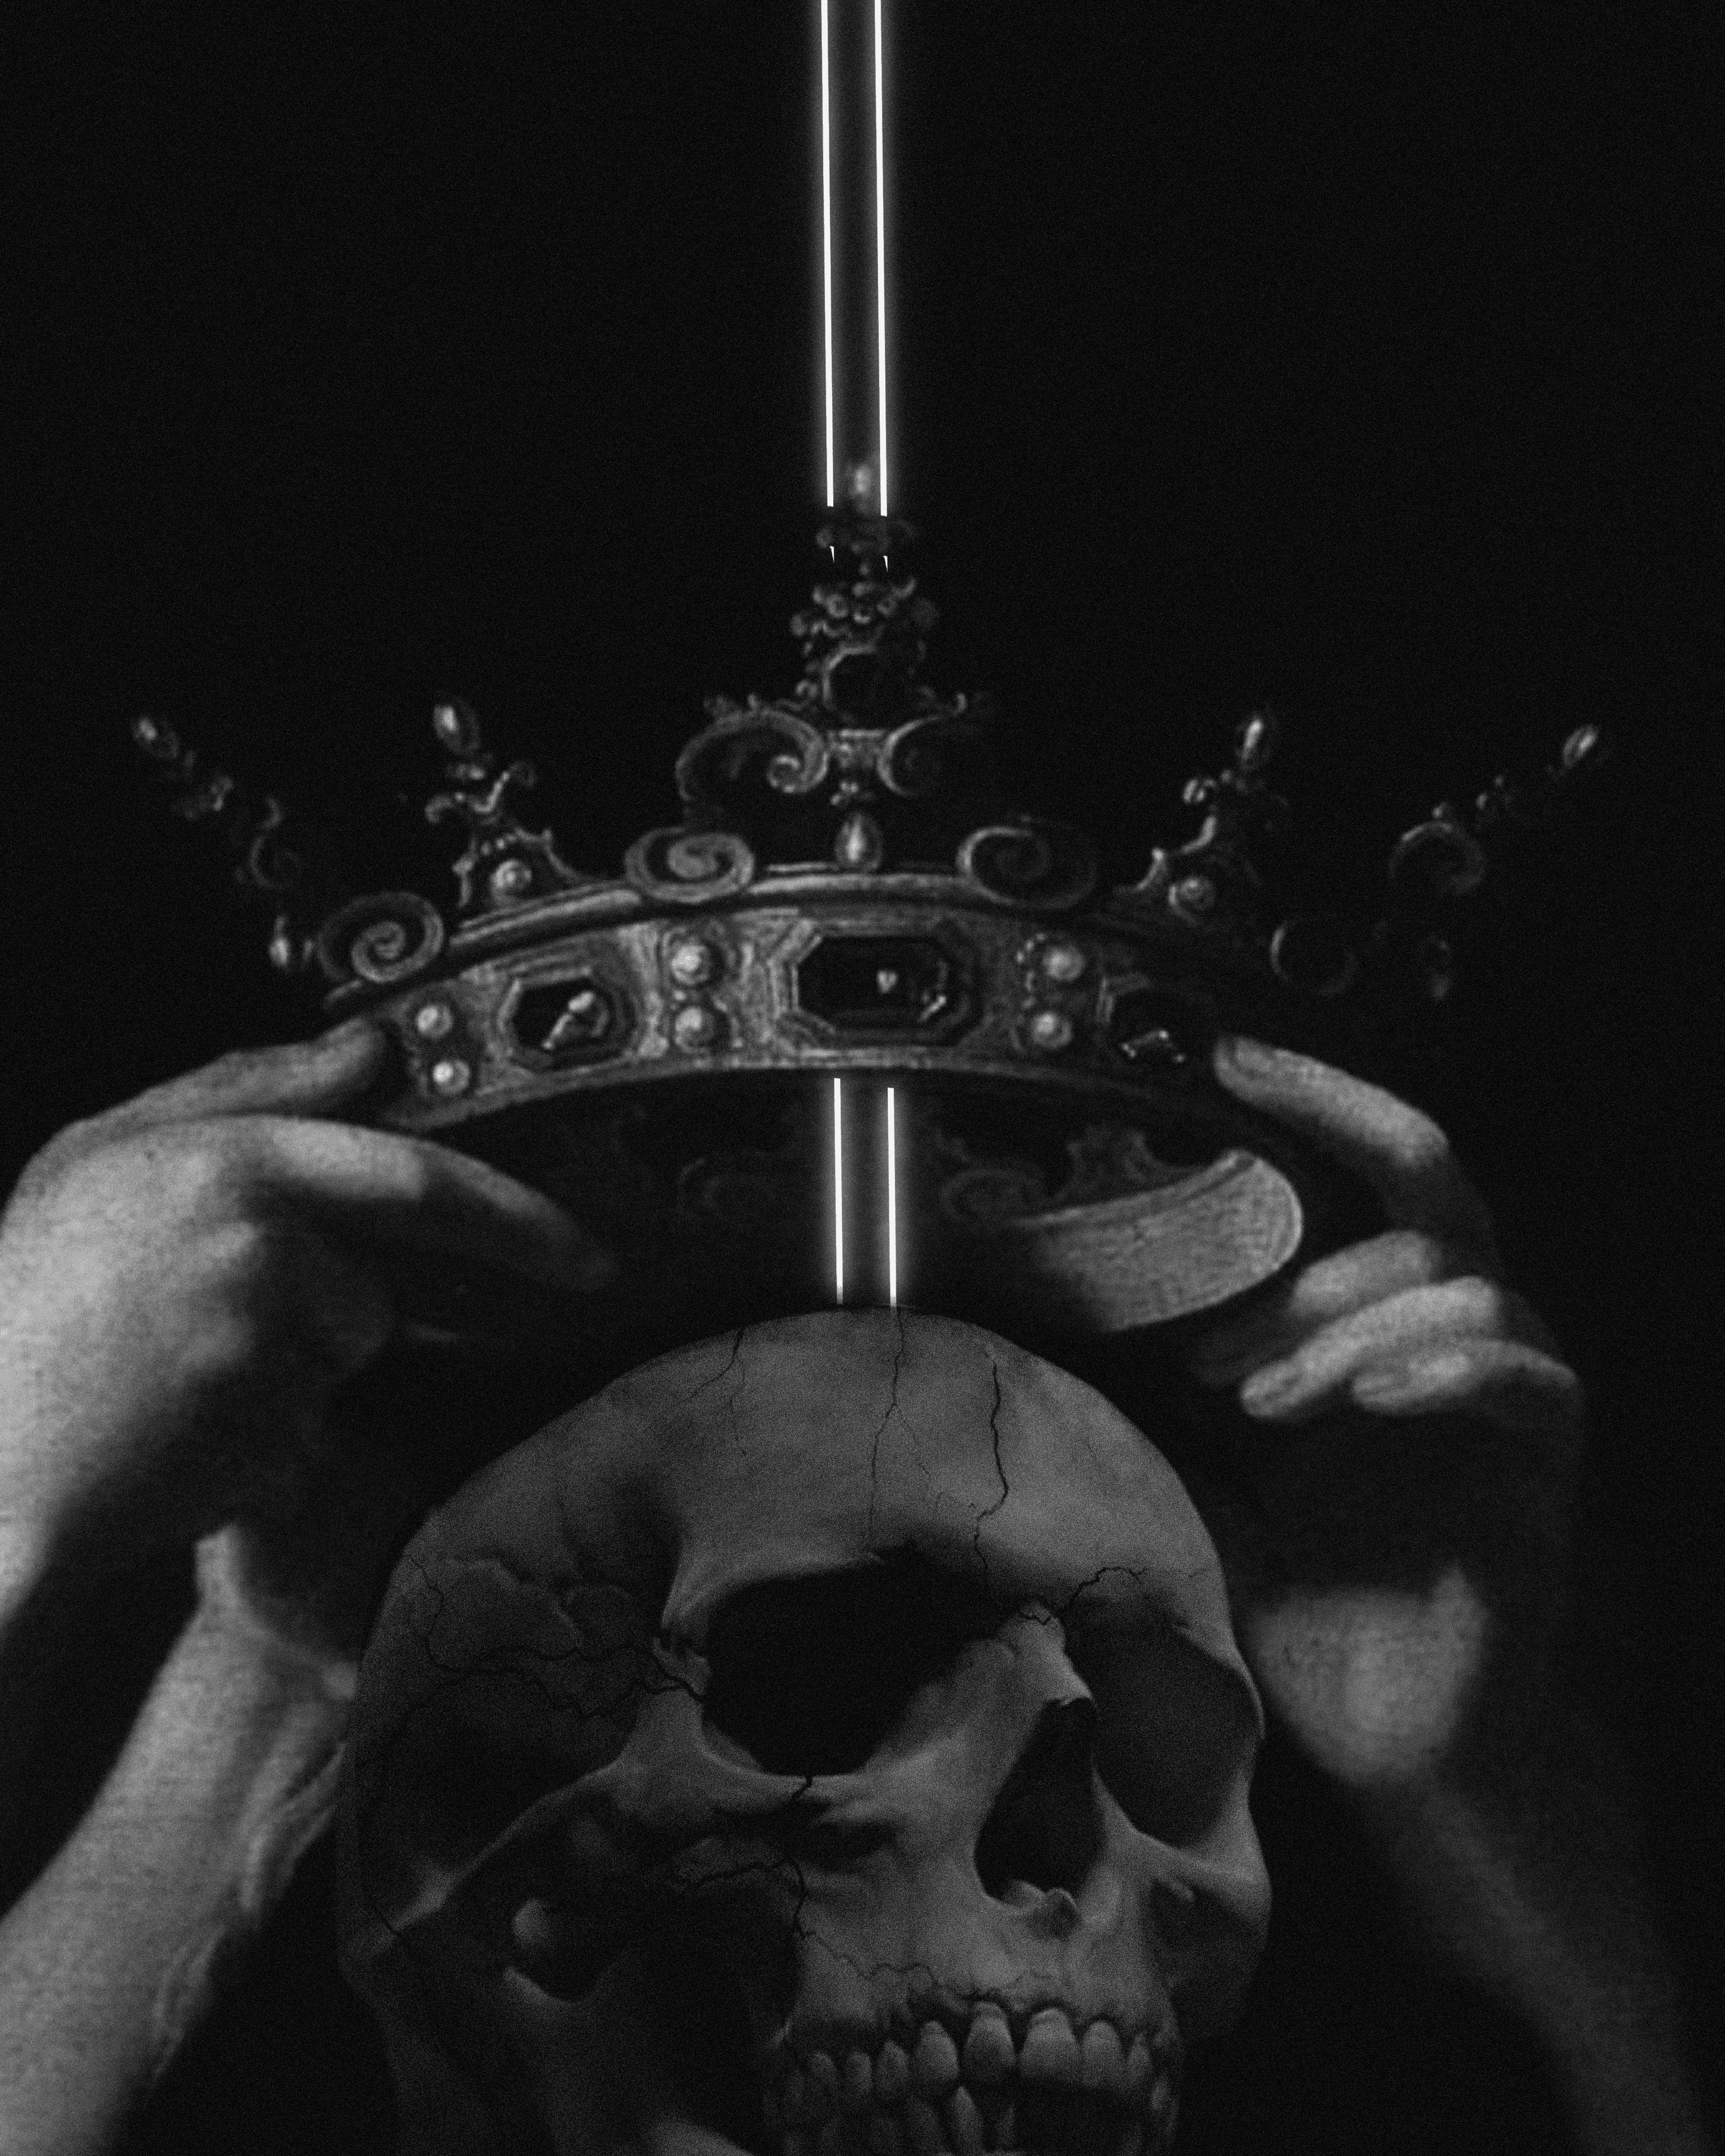 The Dead Need No Crowns